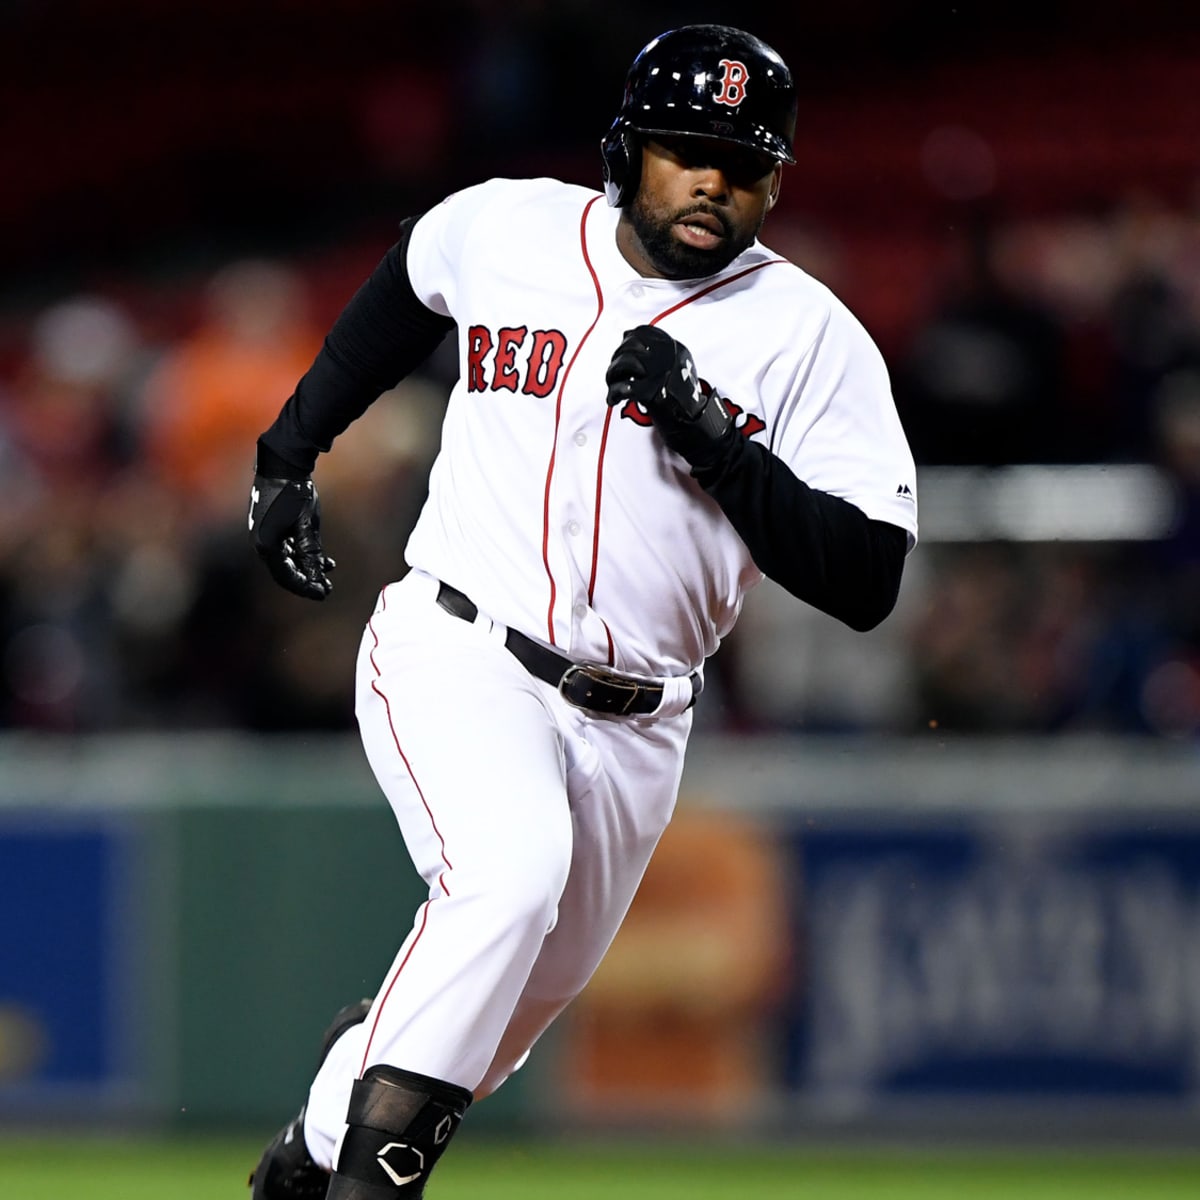 What experts are saying about the Red Sox re-acquiring Jackie Bradley Jr.